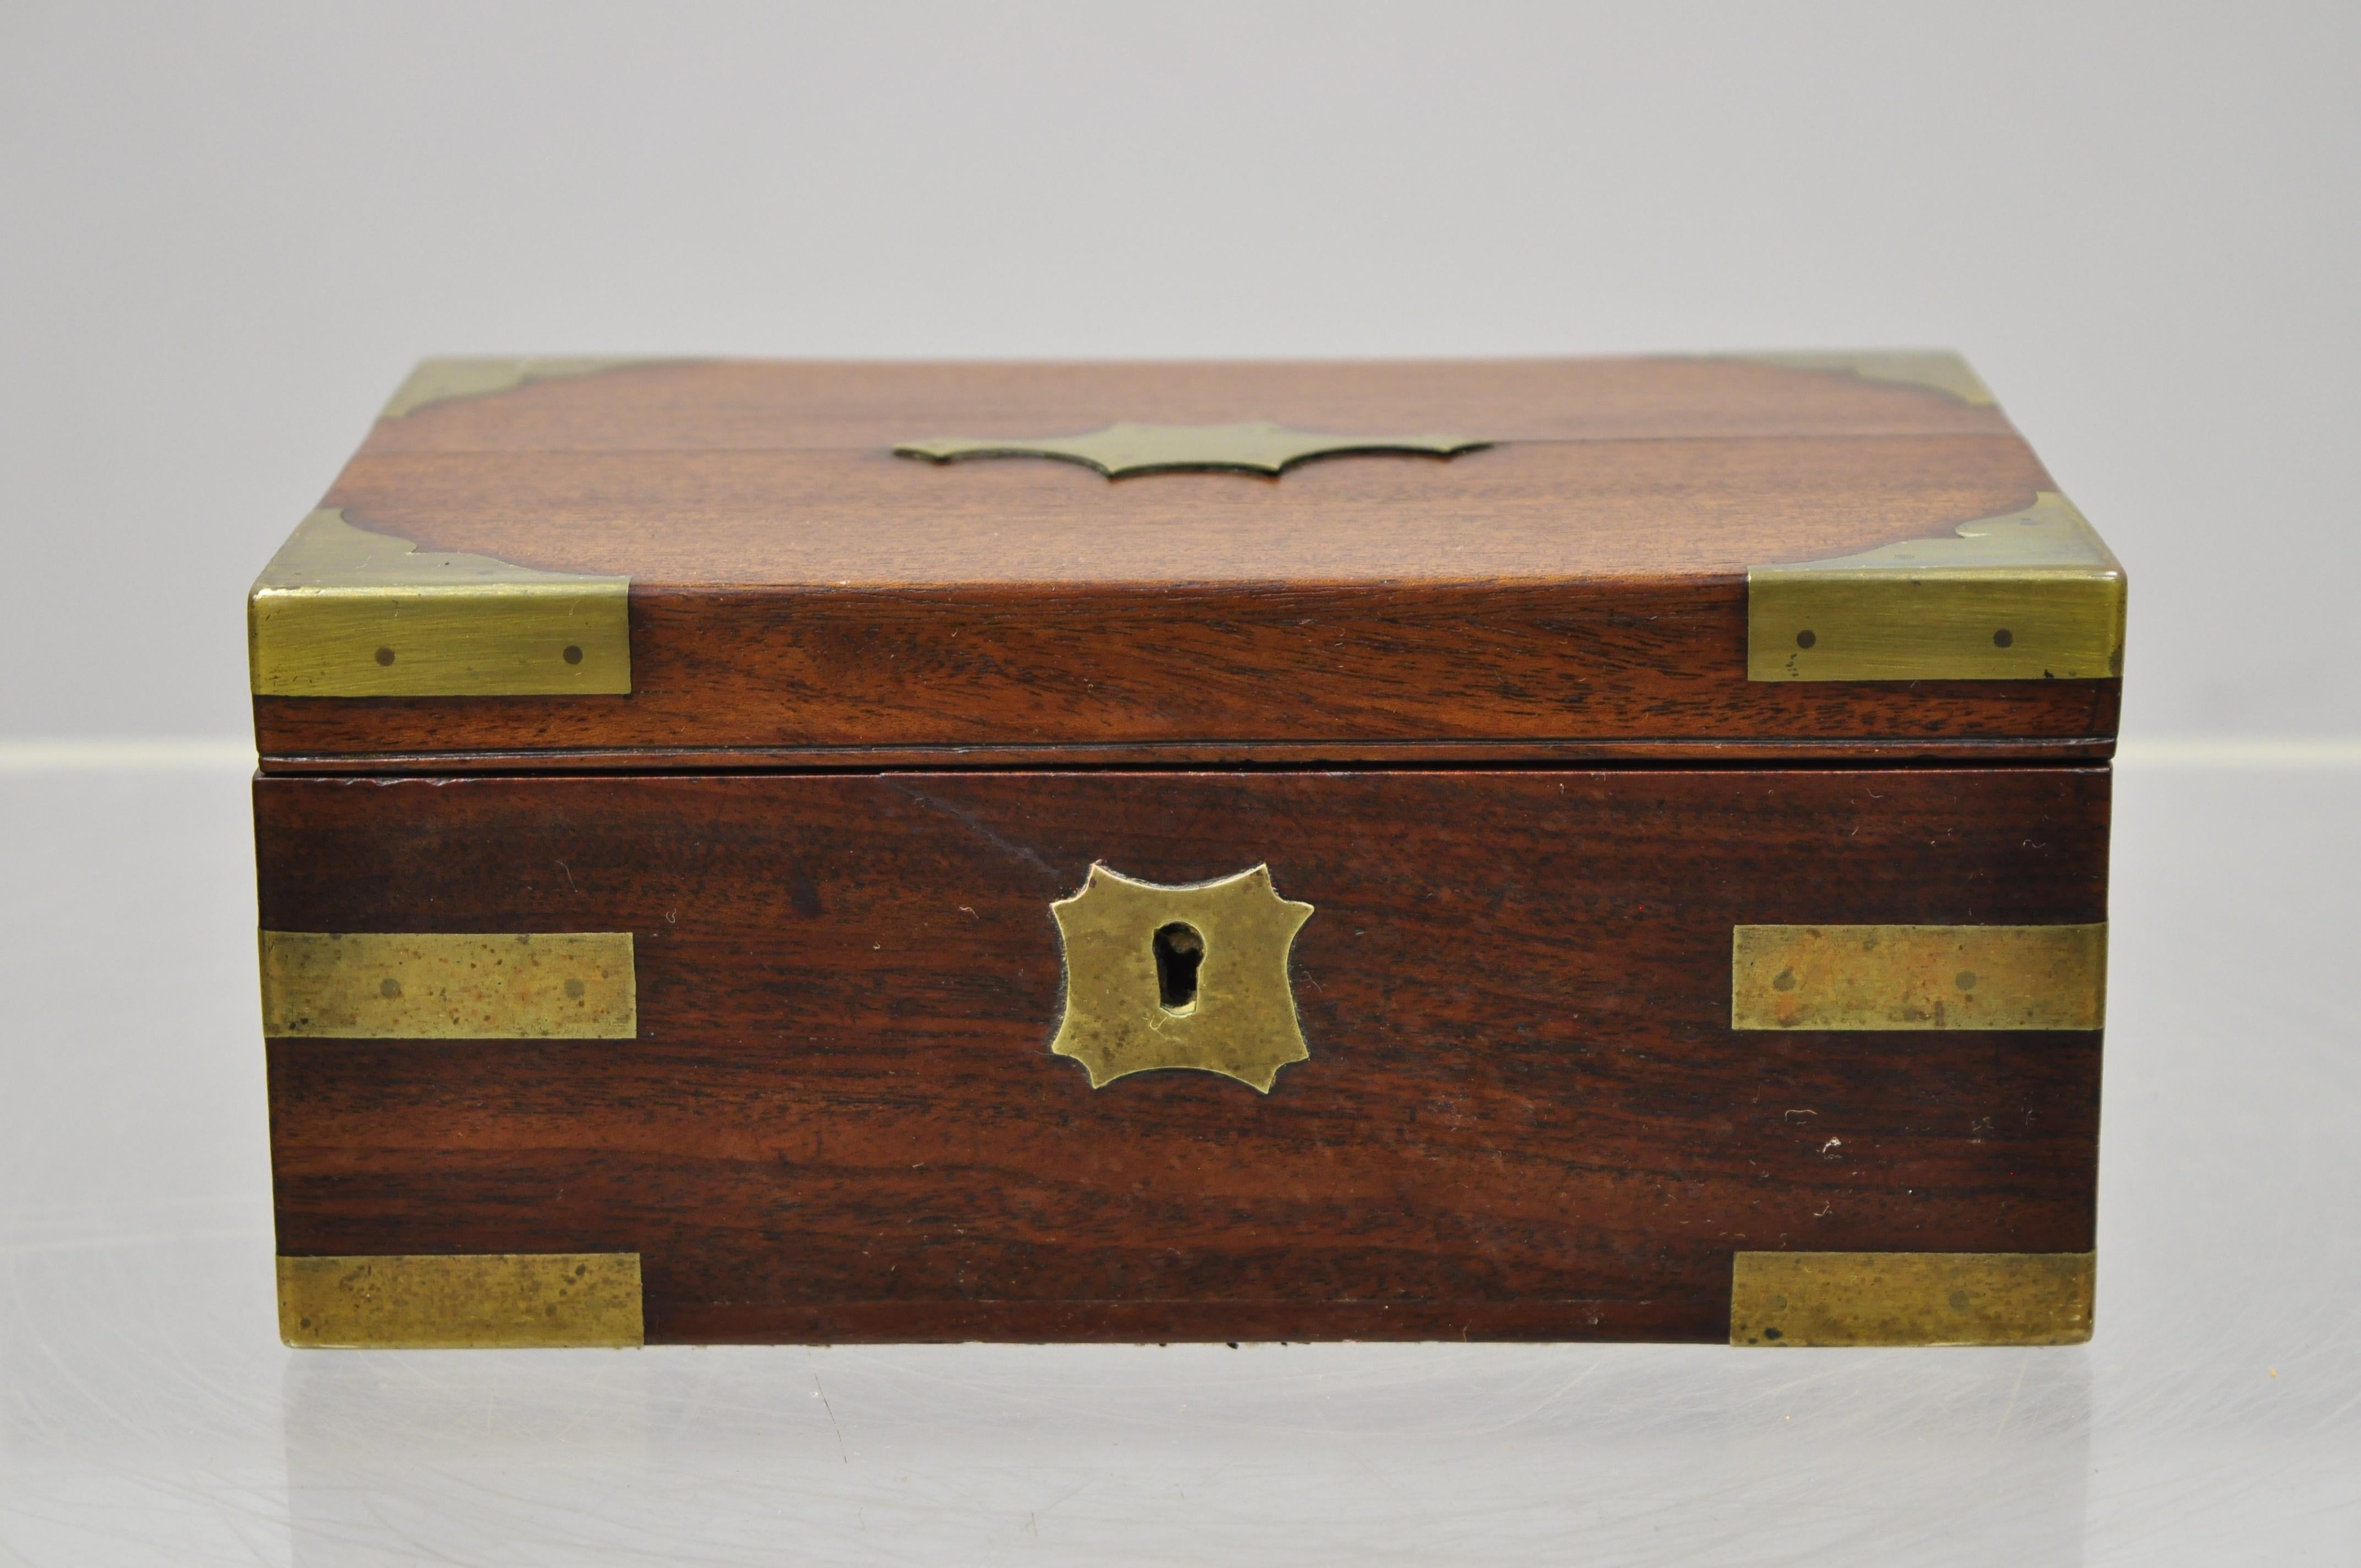 Antique English Campaign style mahogany brass military writing jewelry desk box. Item includes a lift out insert, brass accents, no key, but unlocked, very nice antique item, circa late 19th century. Measurements: 3.5